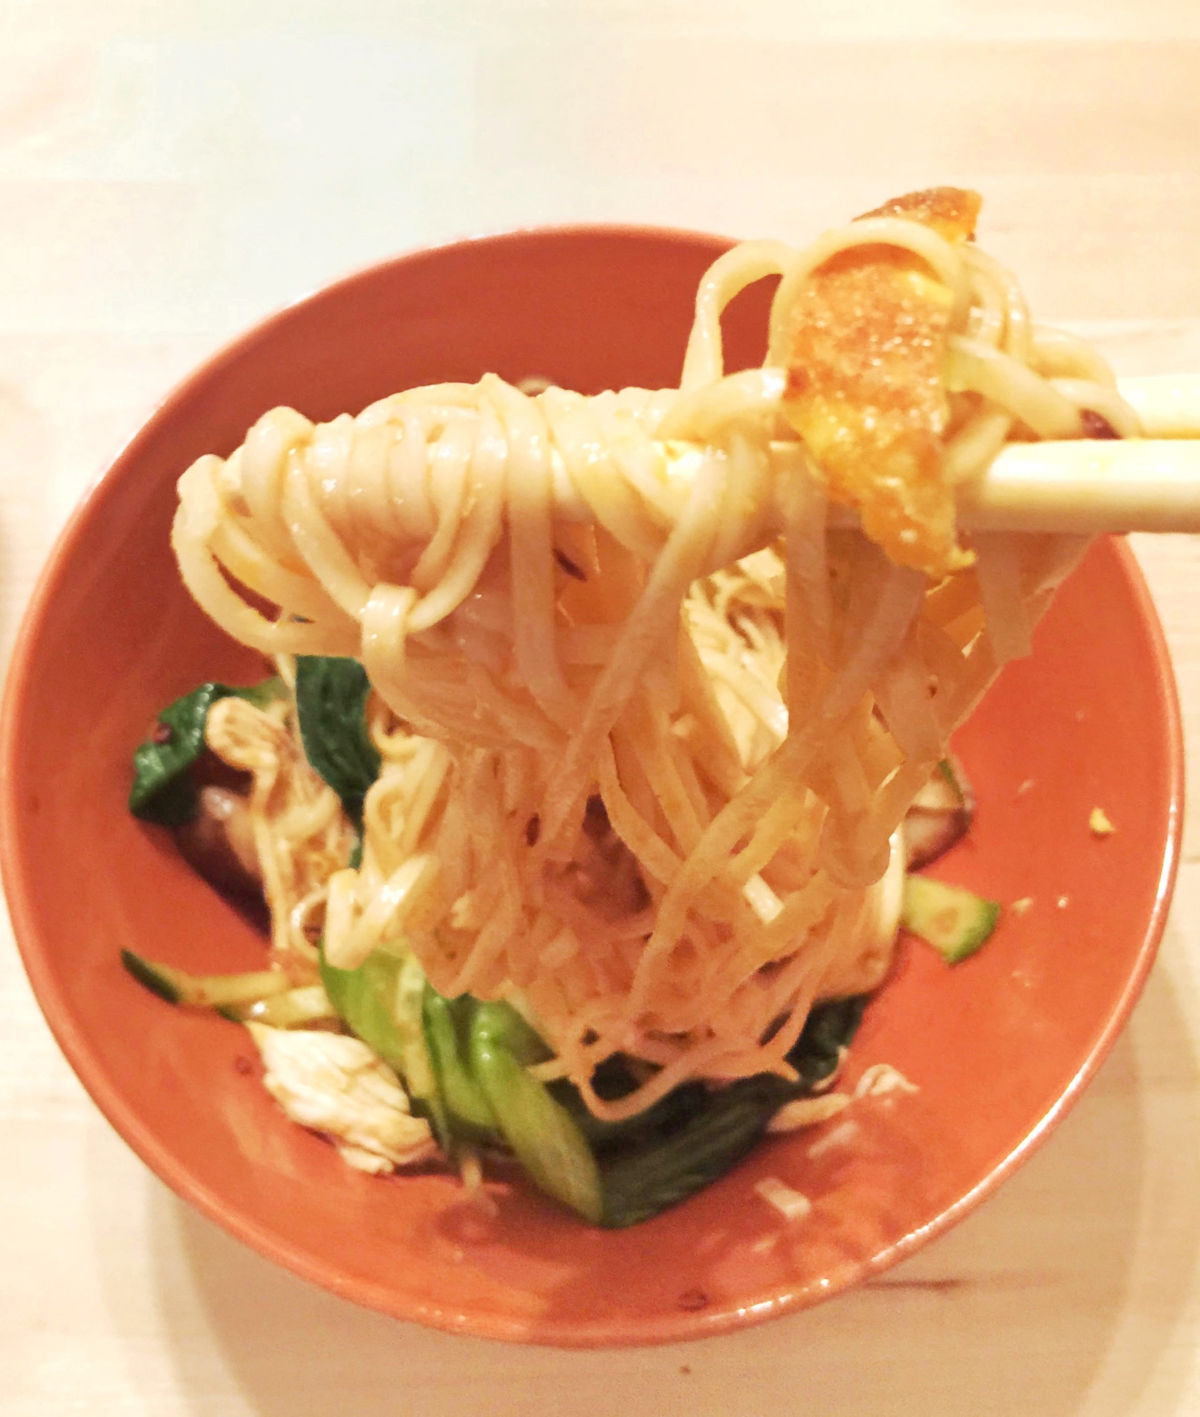 Close-up view of finished cold noodles with shredded chicken in orange bowl with chopsticks.